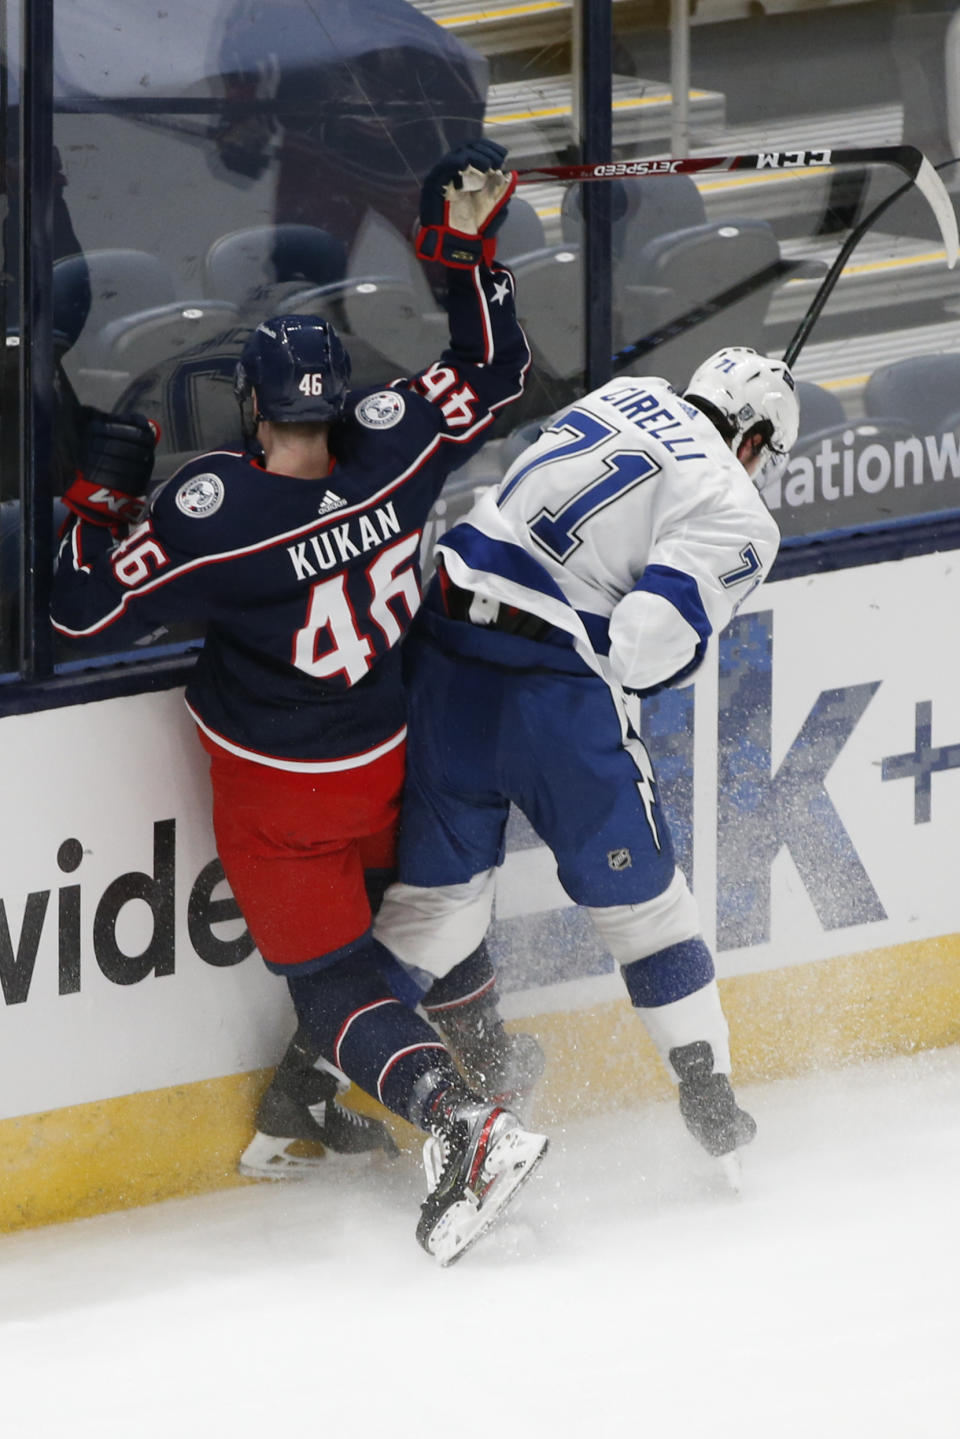 Tampa Bay Lightning's Anthony Cirelli, right, checks Columbus Blue Jackets' Dean Kukan during the second period of an NHL hockey game Thursday, Jan. 21, 2021, in Columbus, Ohio. (AP Photo/Jay LaPrete)